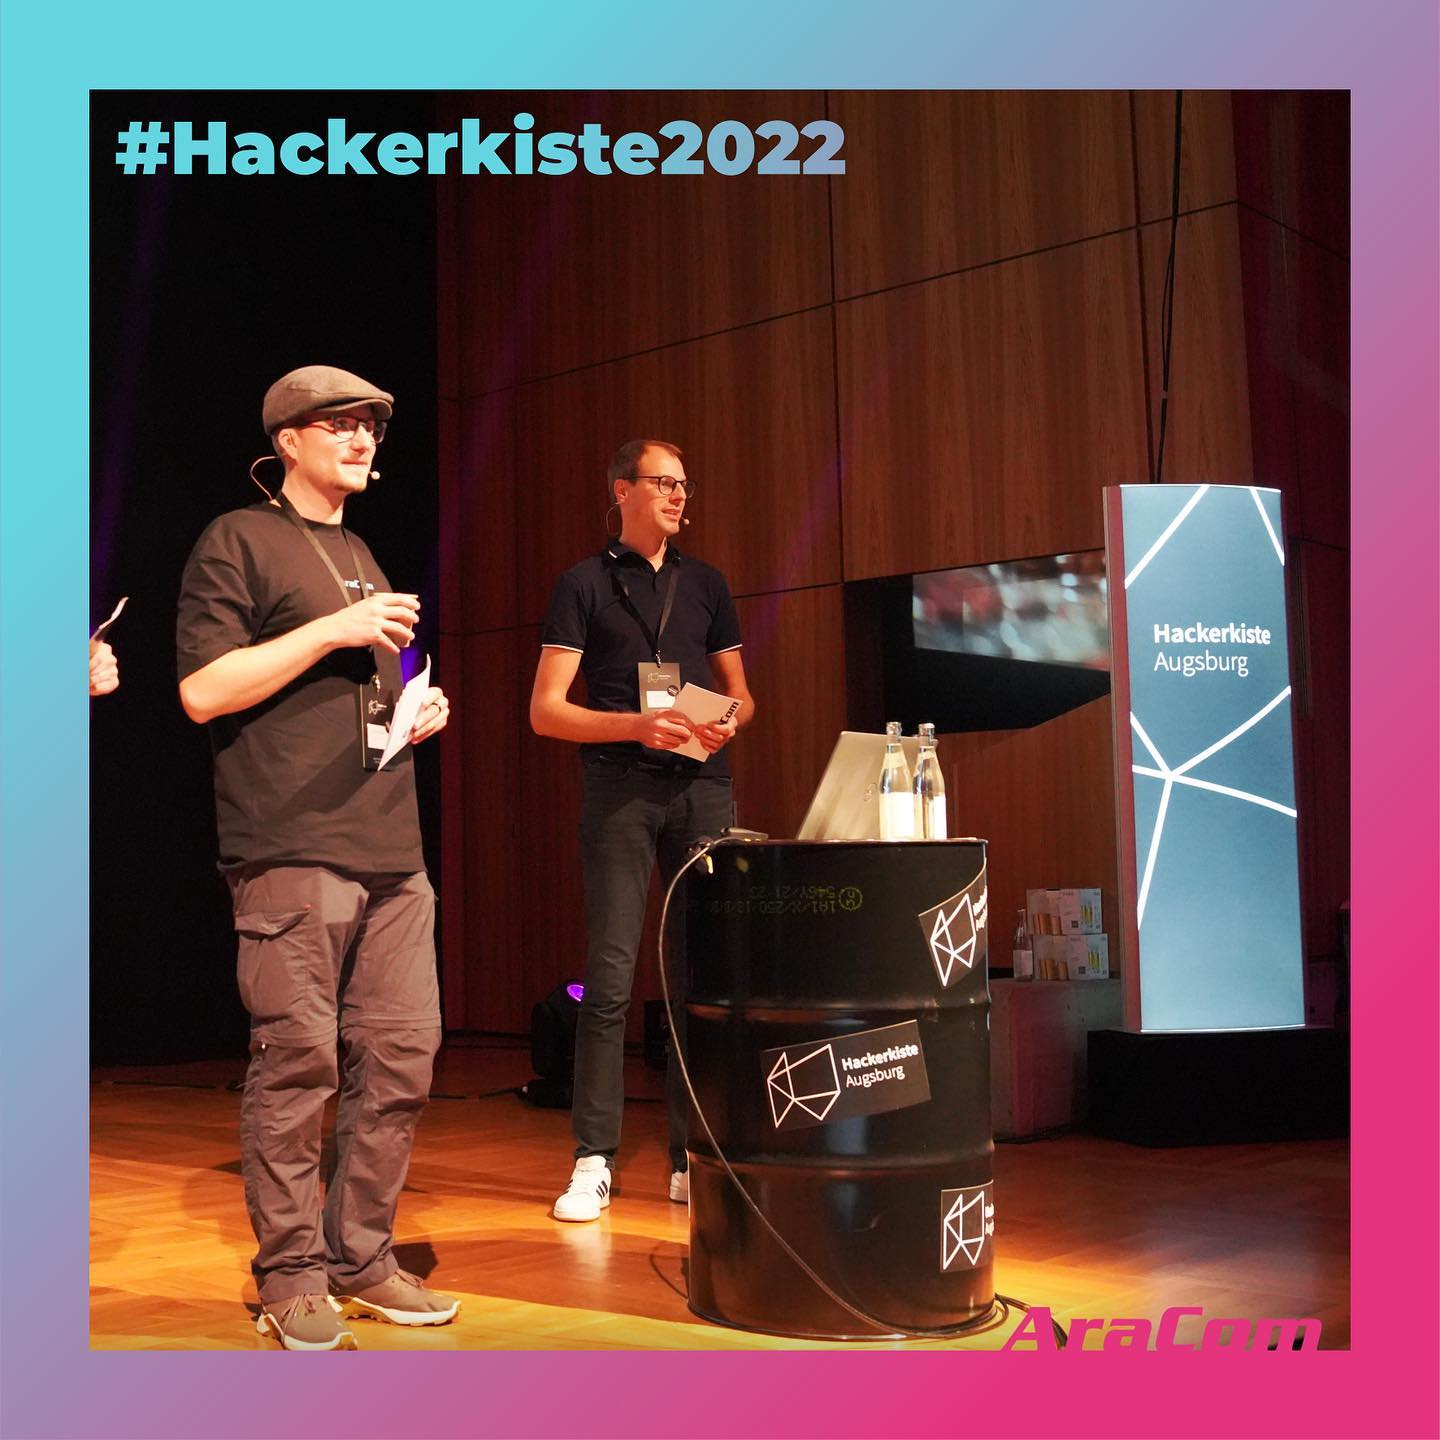 Daniel and Kai presenting a talk about software development at the Hackerkiste conference.